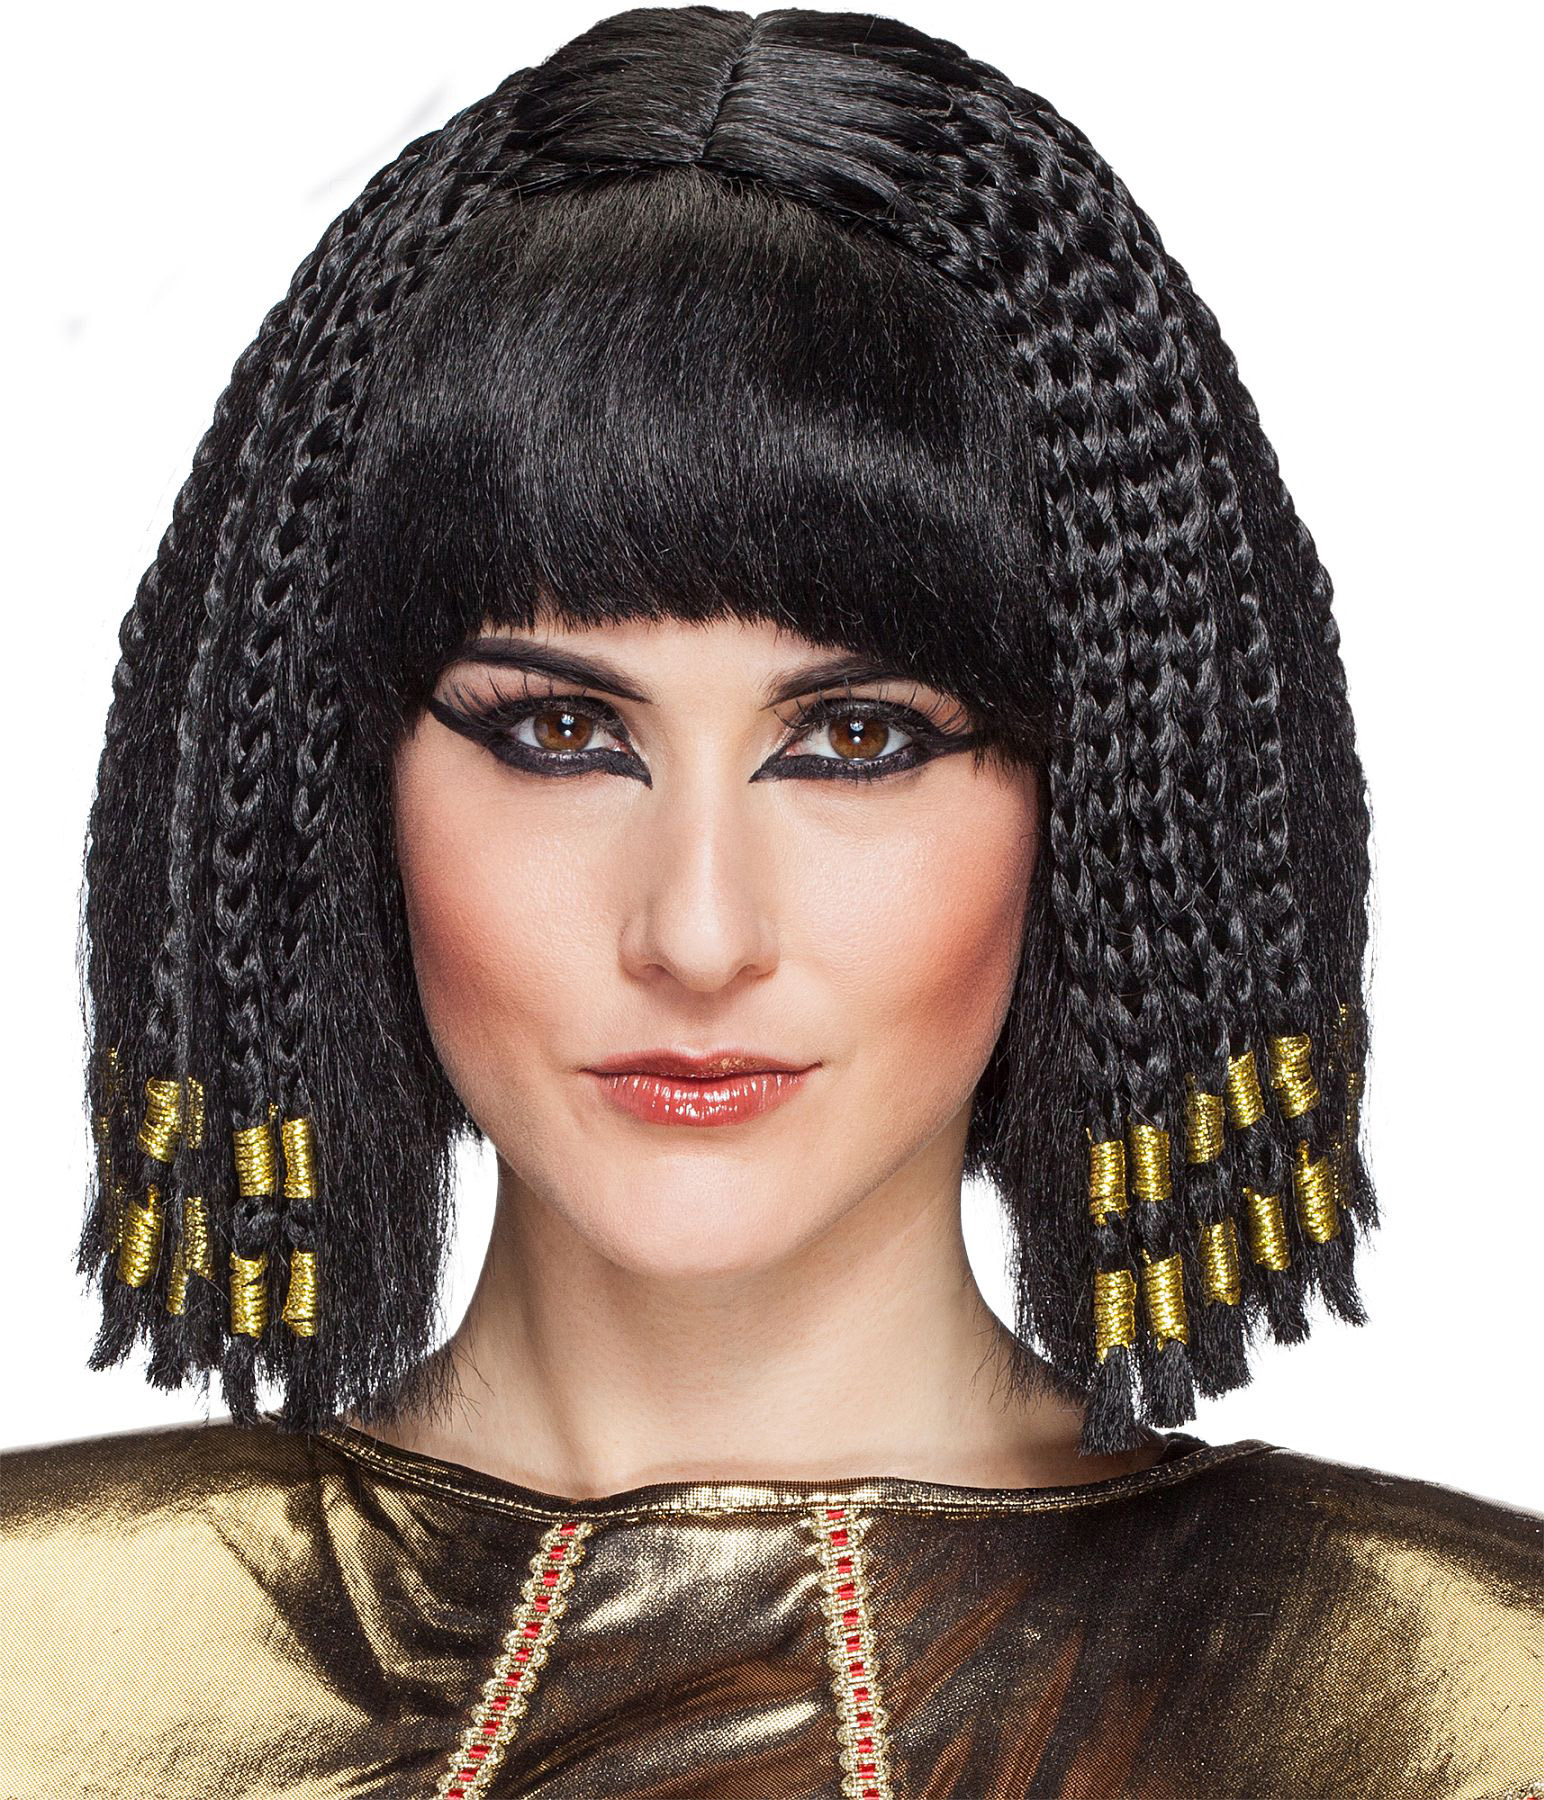 Egyptian queen with braided plaits